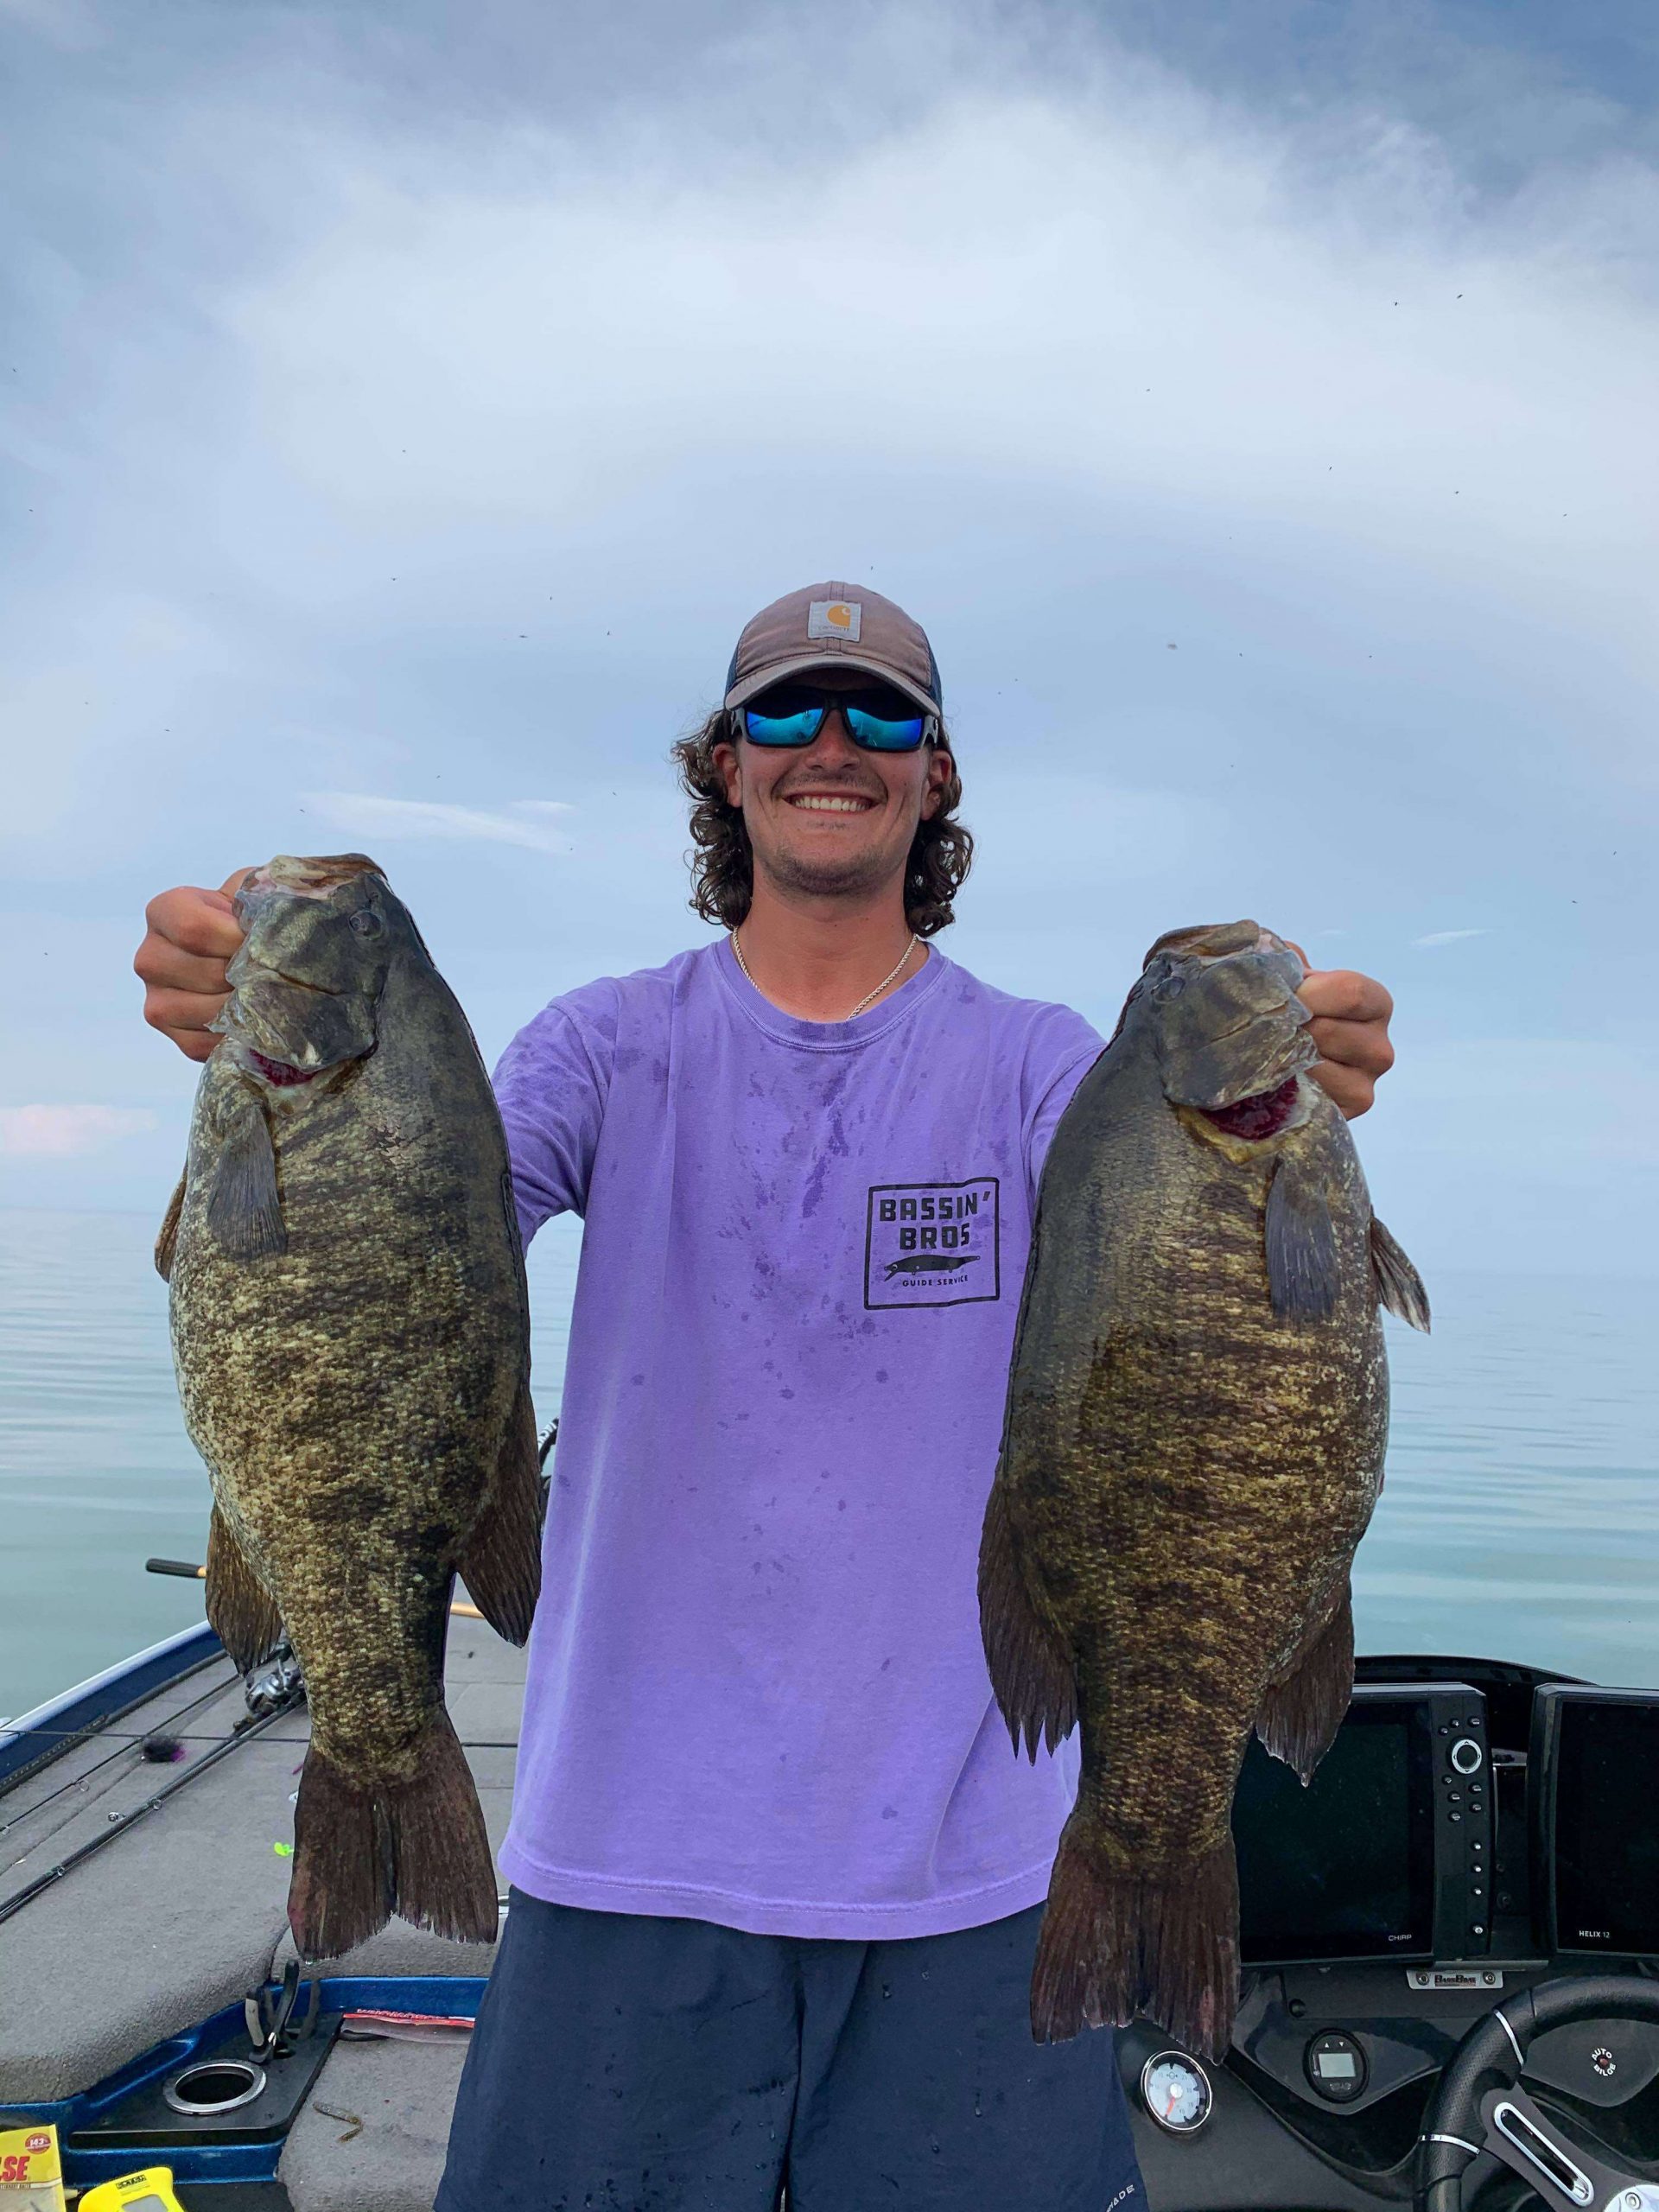 Cruvellier with a pair of giants. Echoing the other anglers, Cruvellier agrees that the event in 2019 was an eye-opener for many anglers. âAbsolutely, that College Bassmaster event was at the perfect time for it to be an absolute slugfest. If it were not so far from everything, I bet you would have had everybody who fished that tournament there on opening day of this year and probably every year to follow.â  